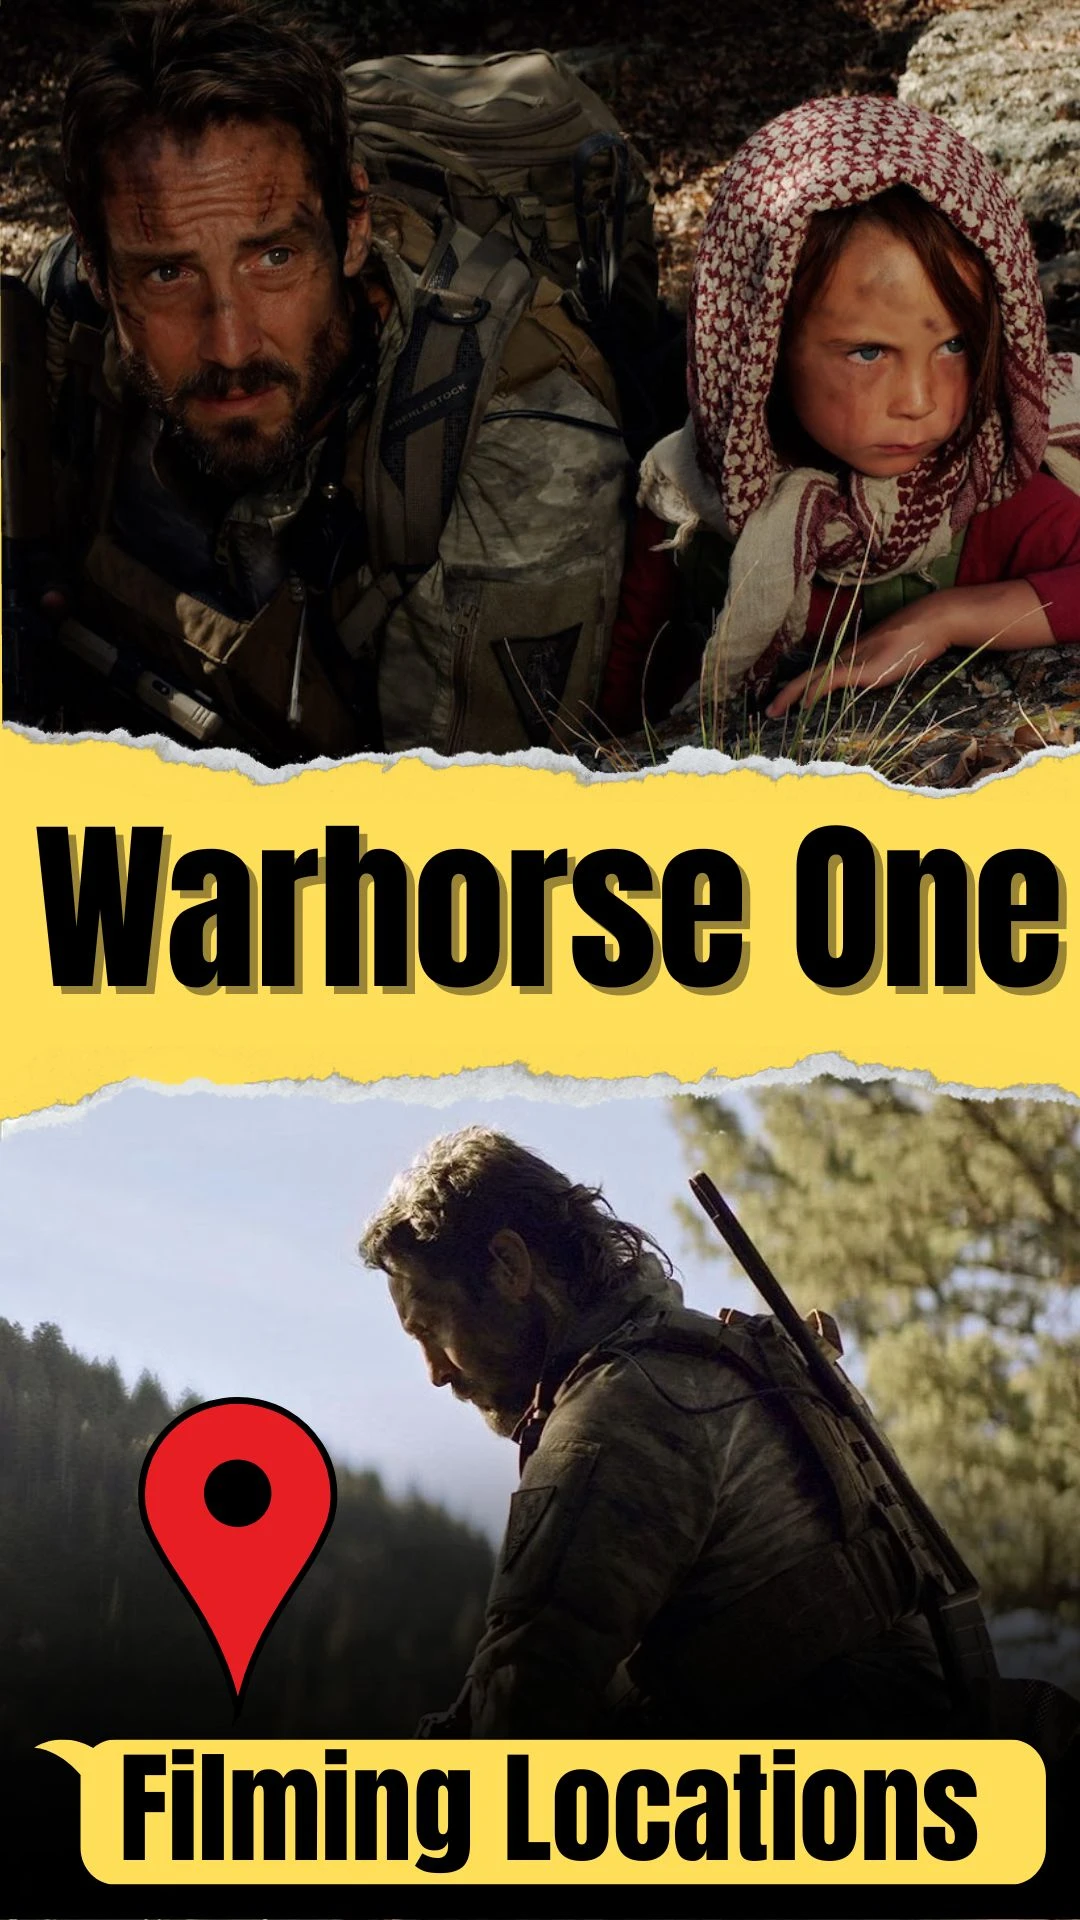 Warhorse One Filming Locations